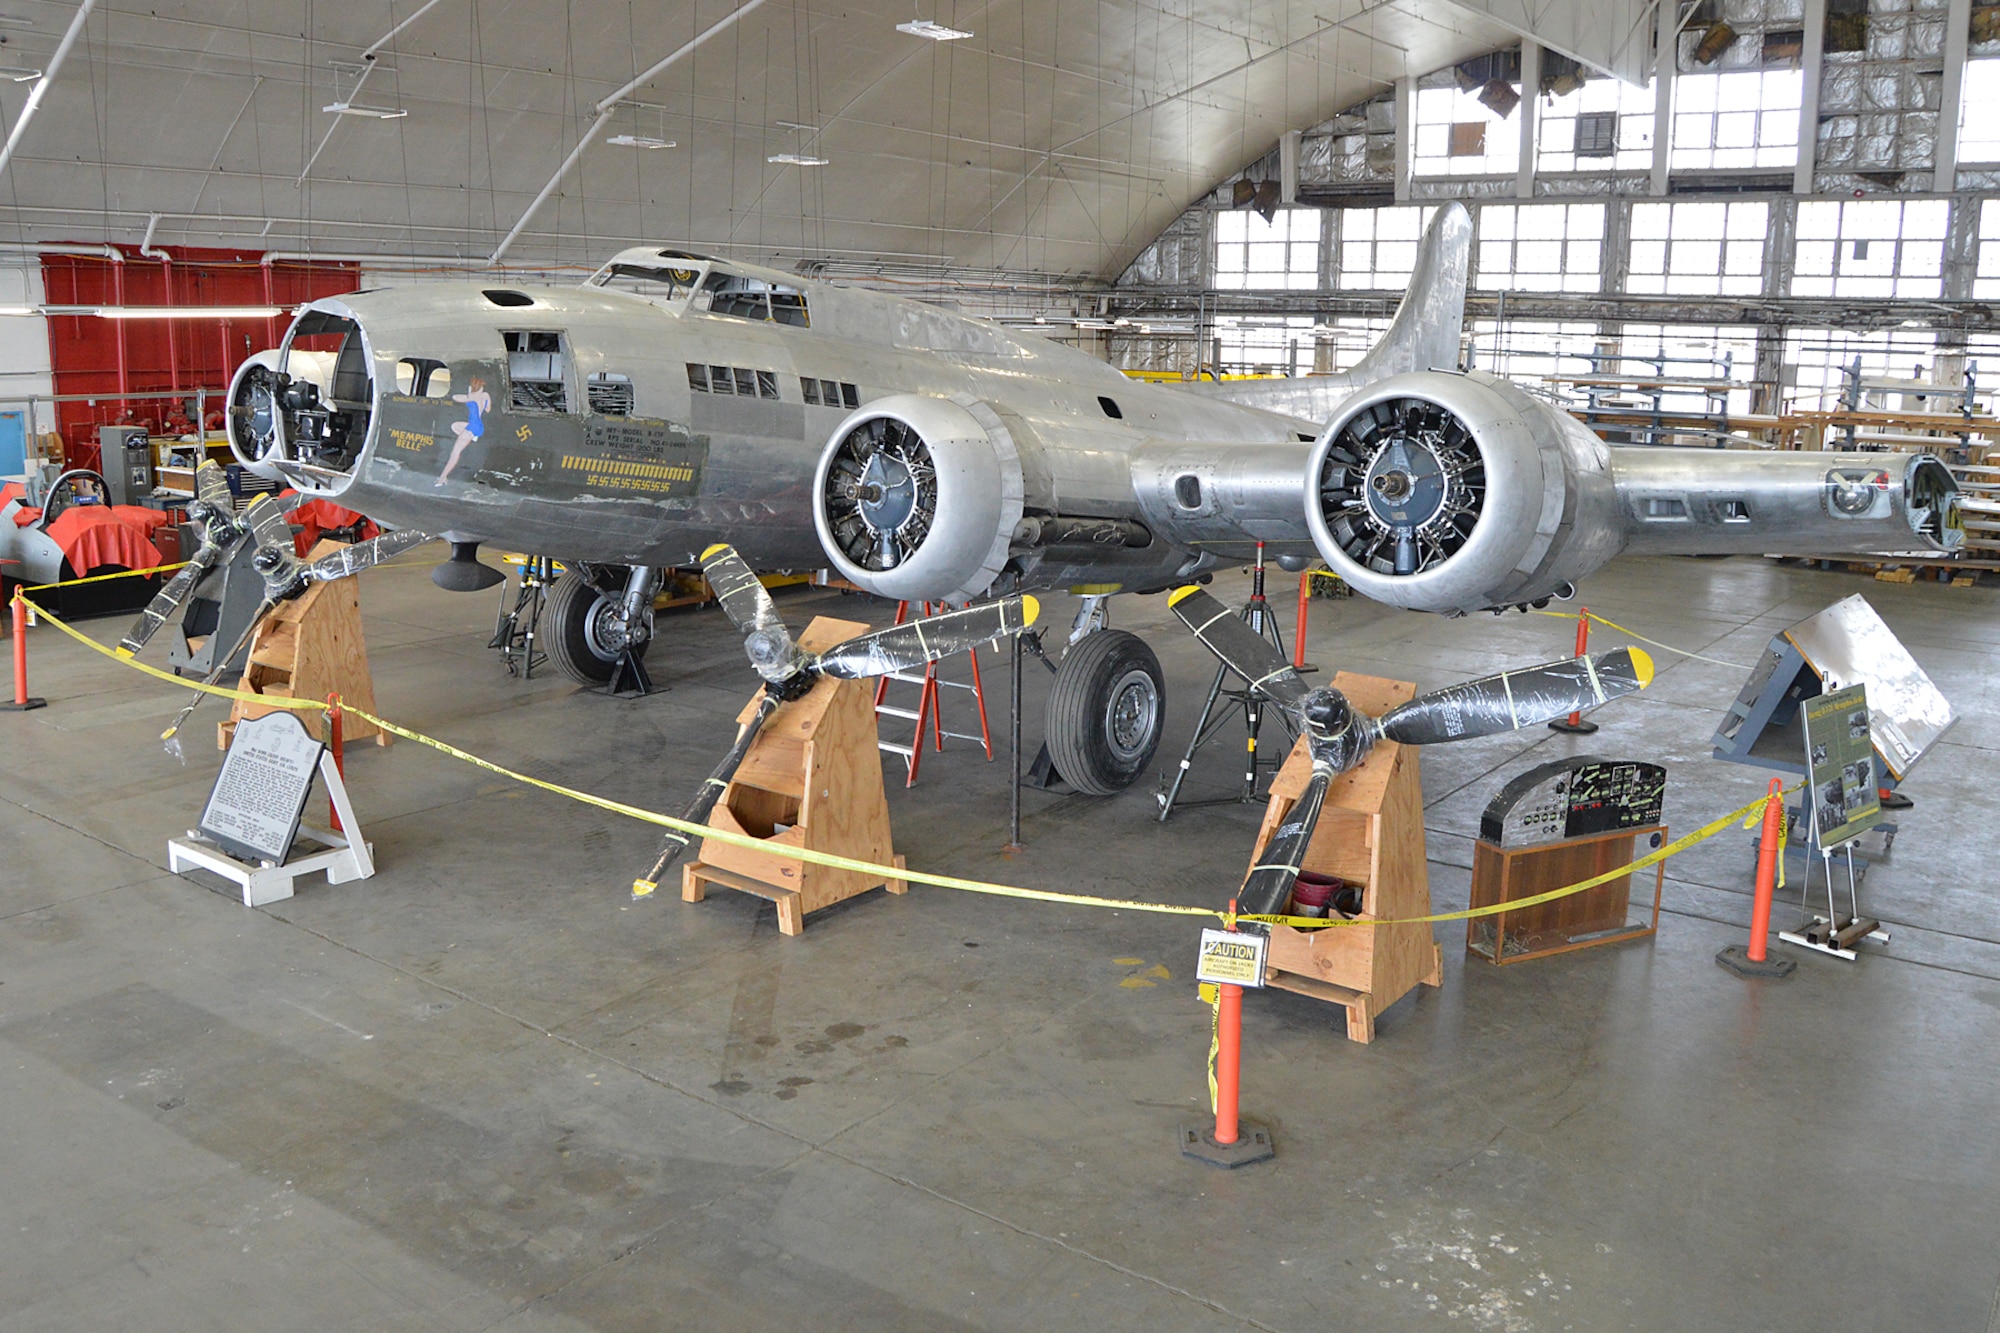 DAYTON, Ohio (12/2014) -- The B-17F "Memphis Belle" in the restoration hangar at the National Museum of the United States Air Force. (U.S. Air Force photo)